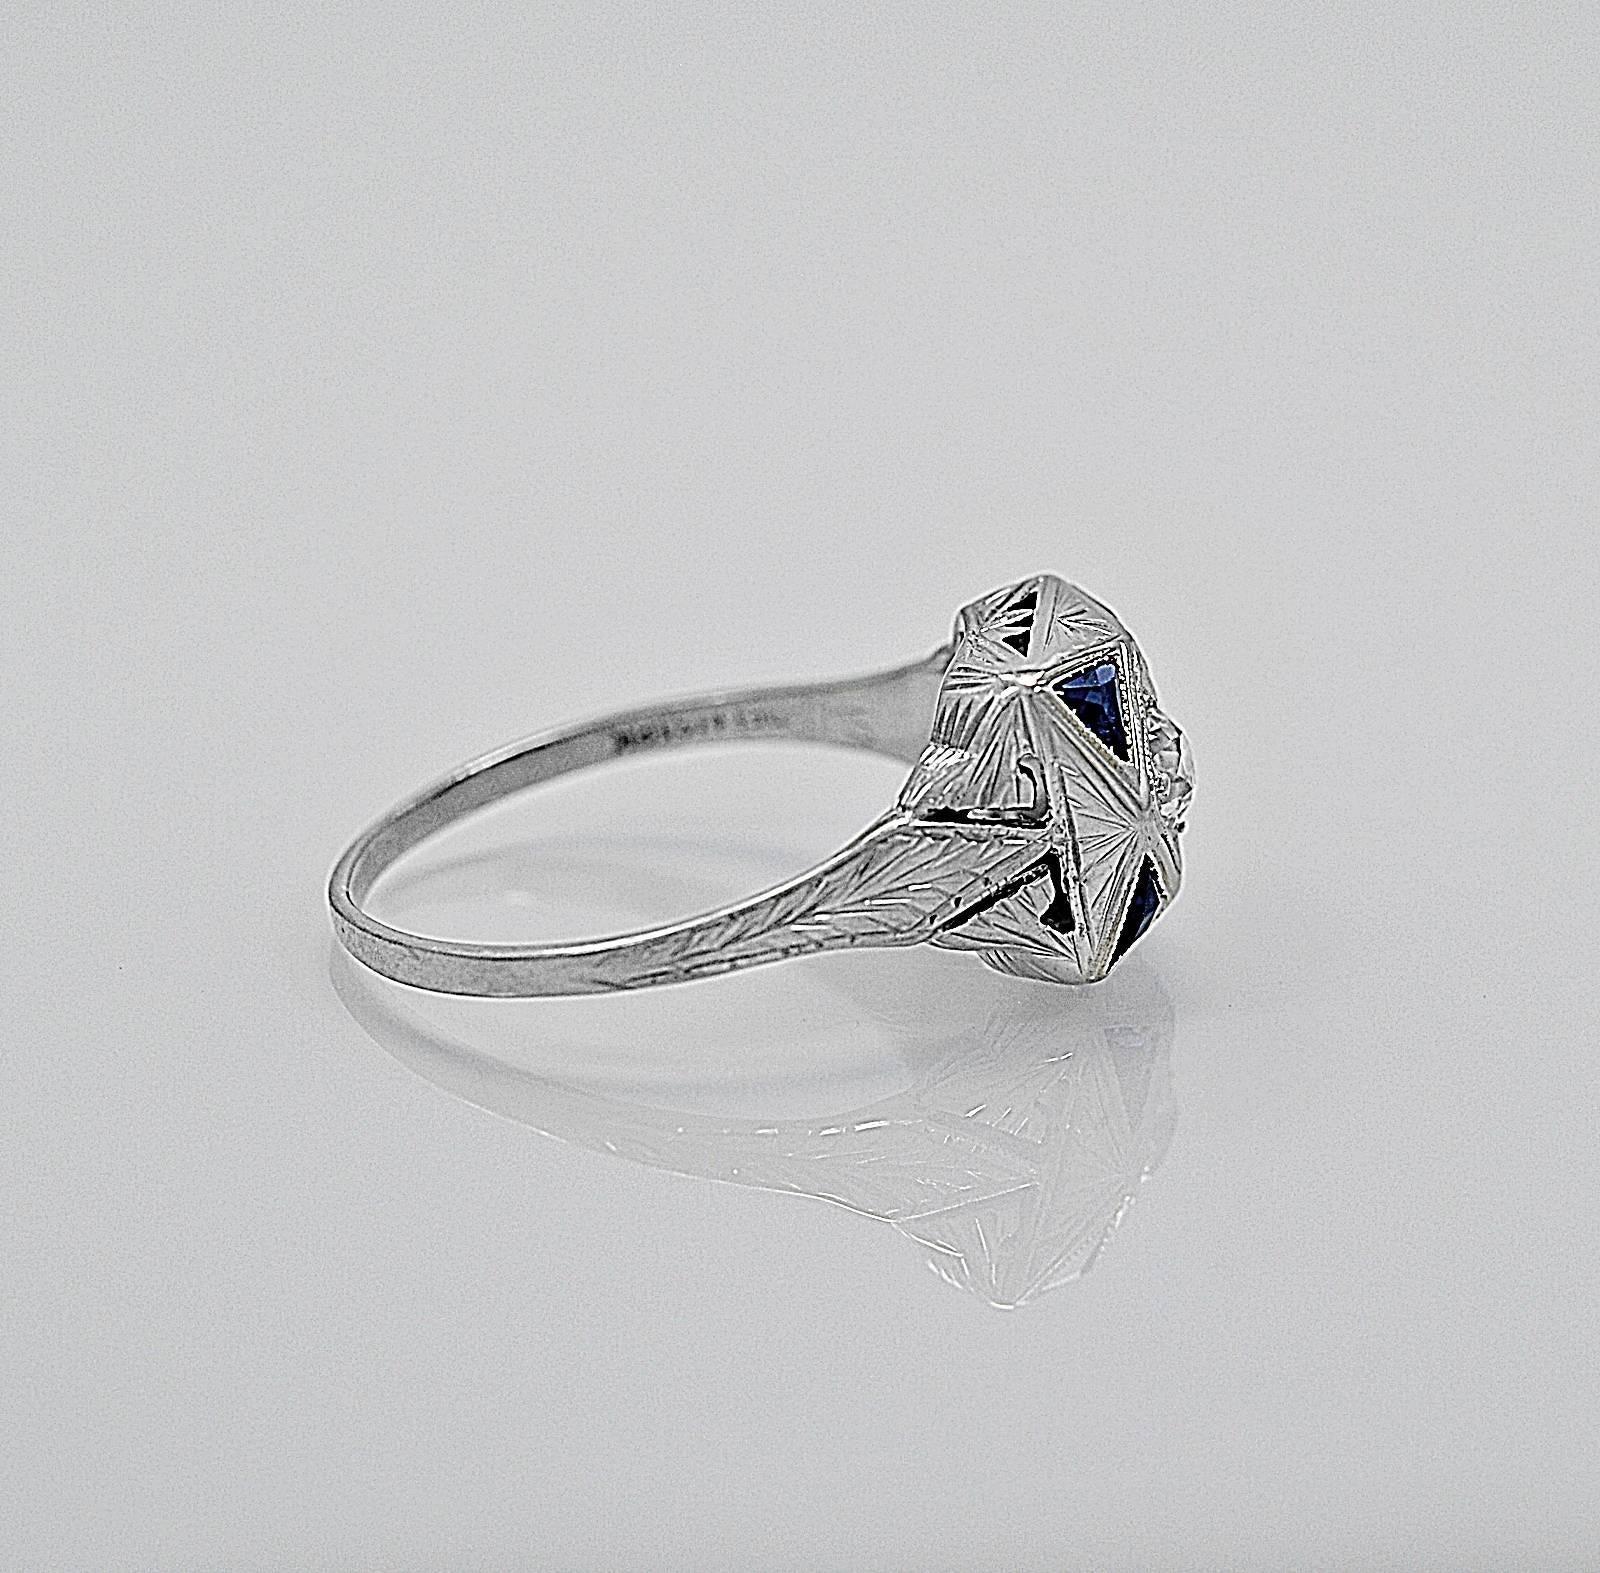 An artistically crafted 18K white gold antique engagement/fashion ring featuring a scintillating .20ct. apx. European cut diamond with exceptional VS1 clarity and equally exceptional F color. The center diamond is accented with four triangular